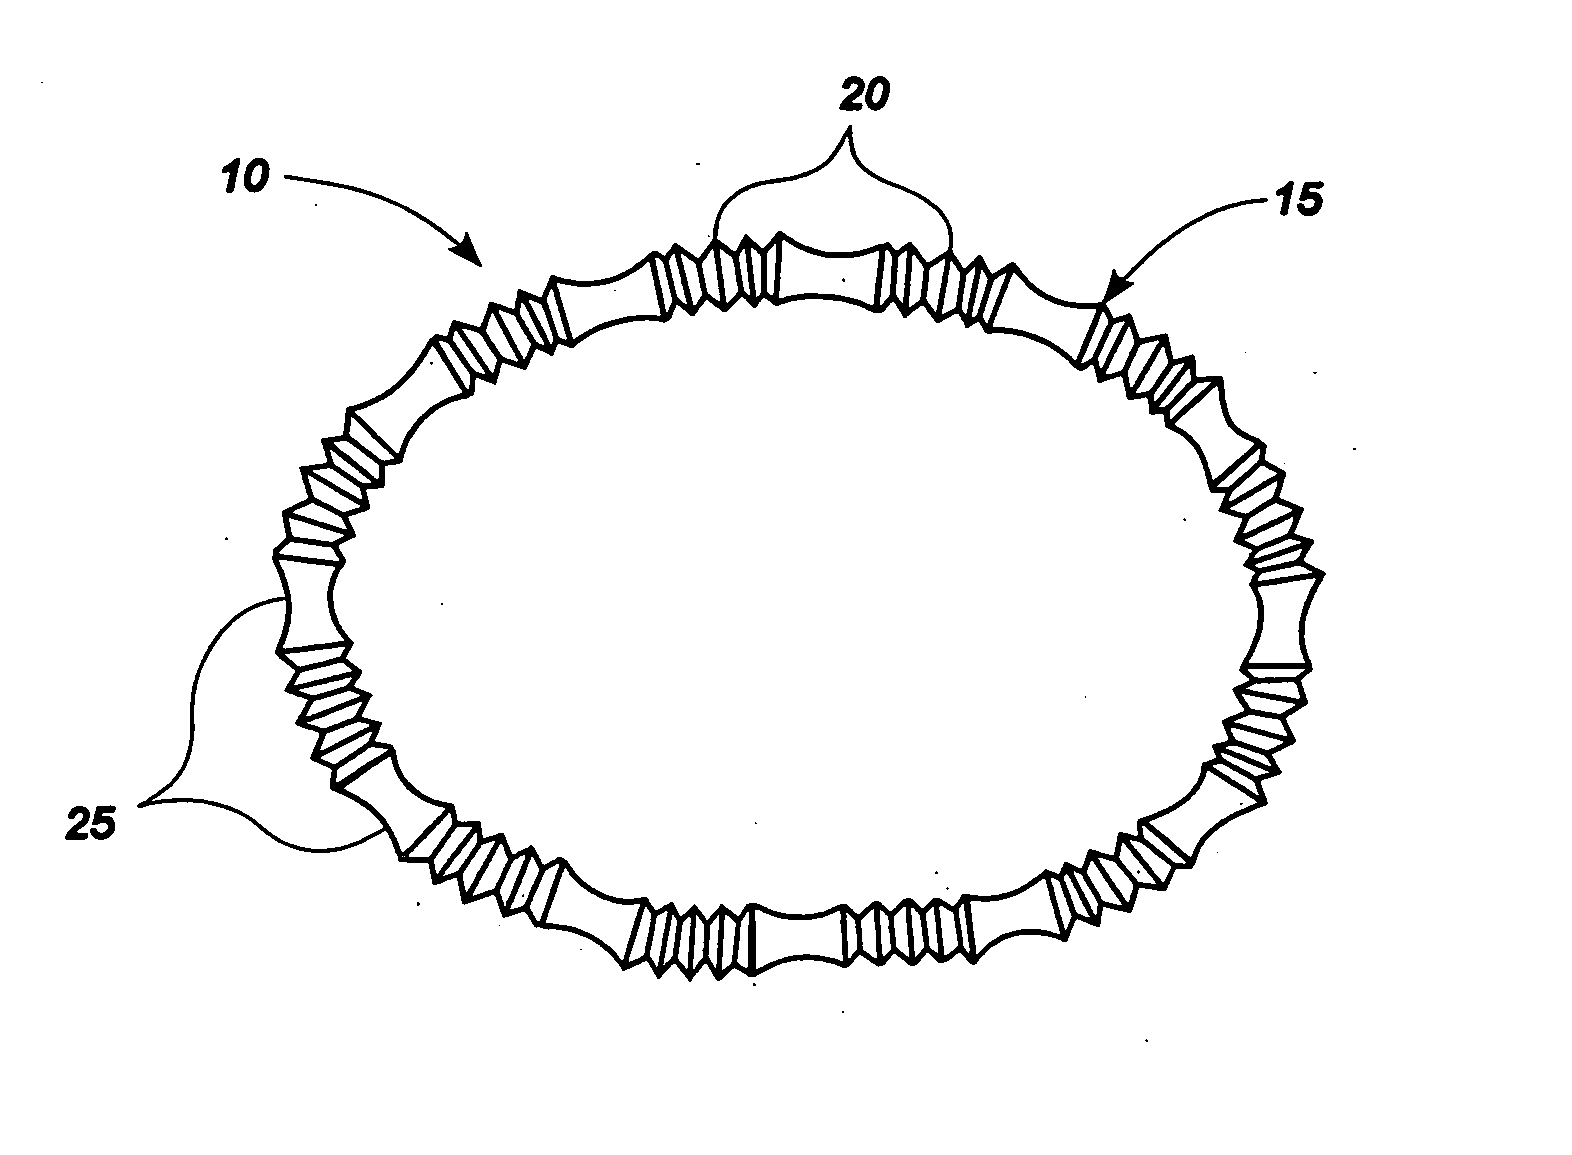 Methods and apparatus for controlling the internal circumference of an anatomic orifice or lumen